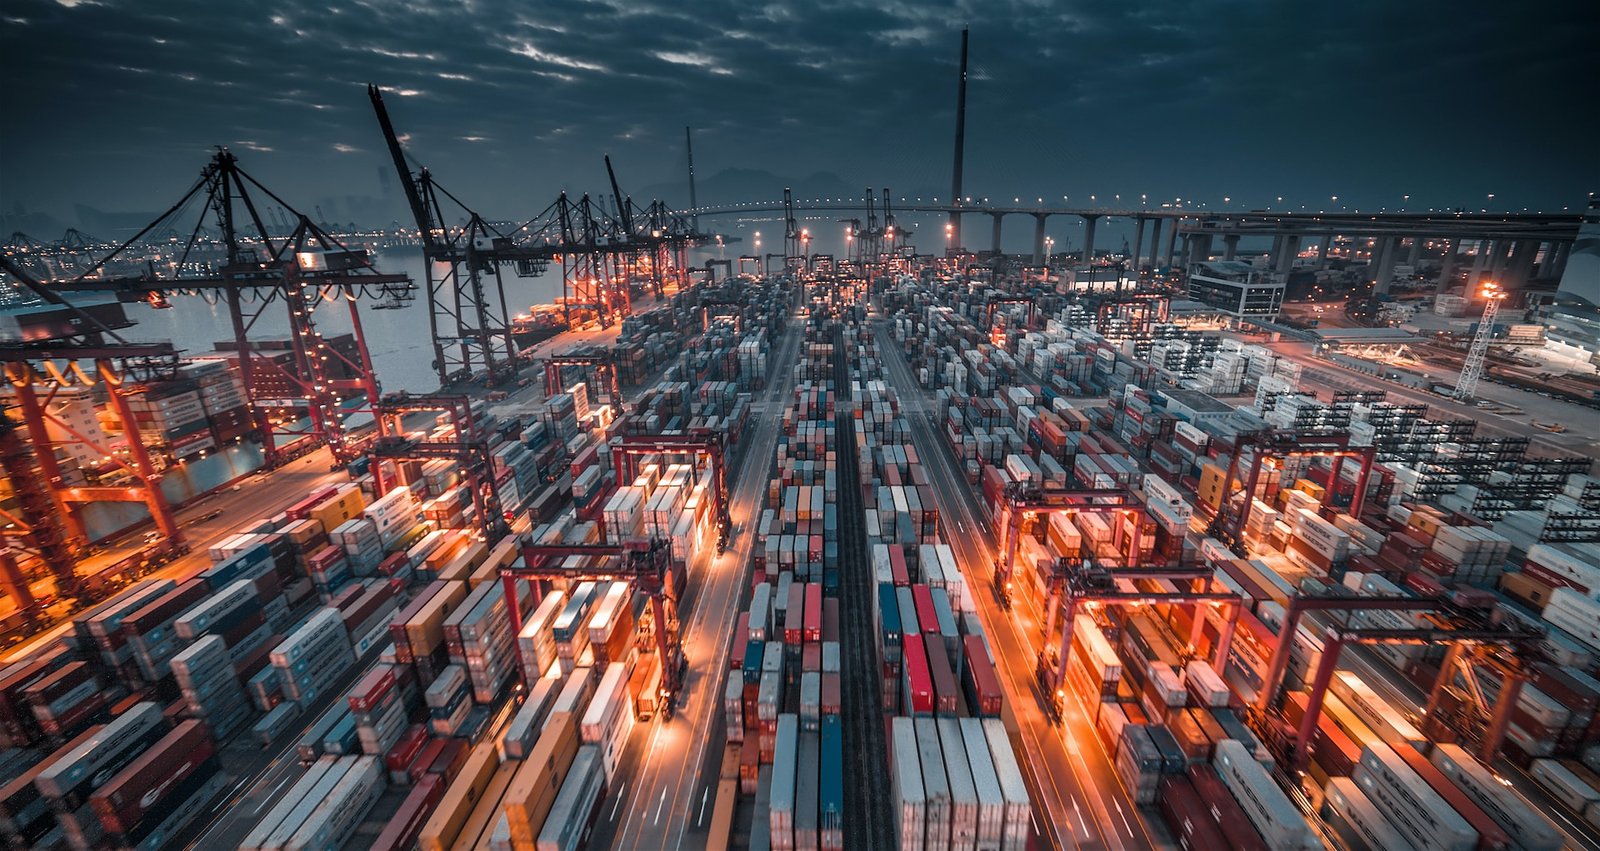 A harbor in the night with multiple containers